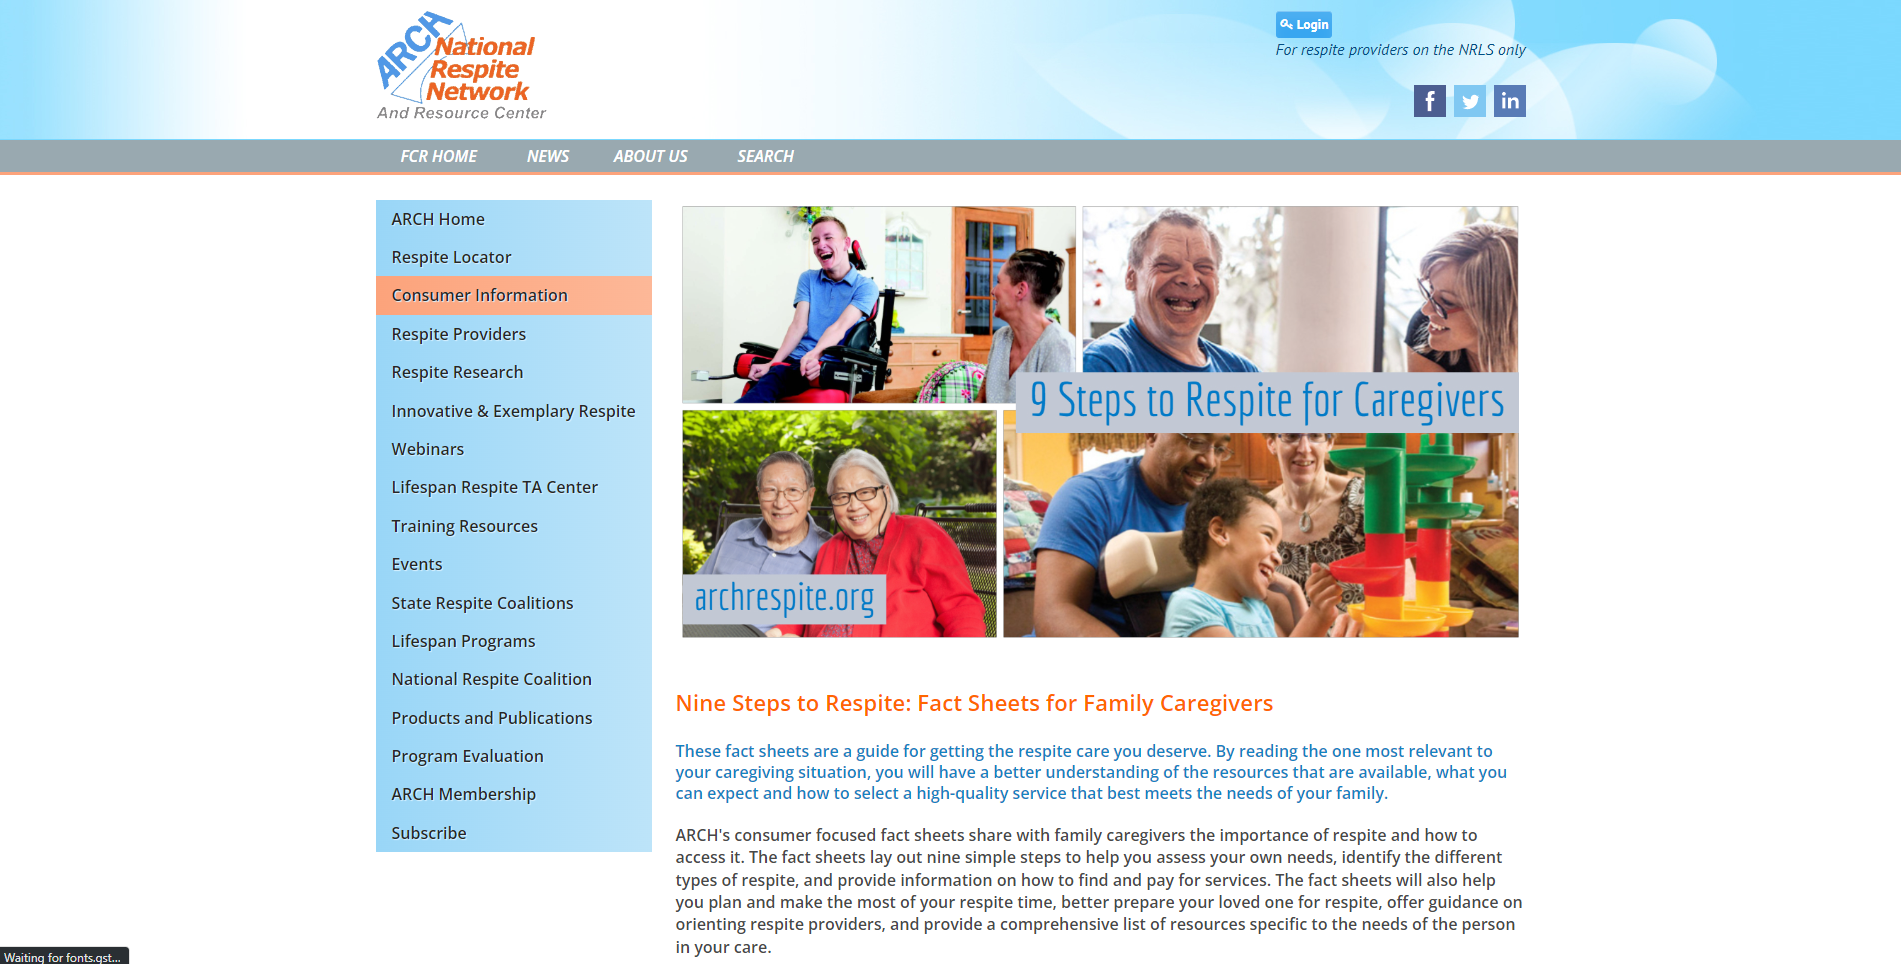 Nine Steps to Respite: Fact Sheets for Family Caregivers